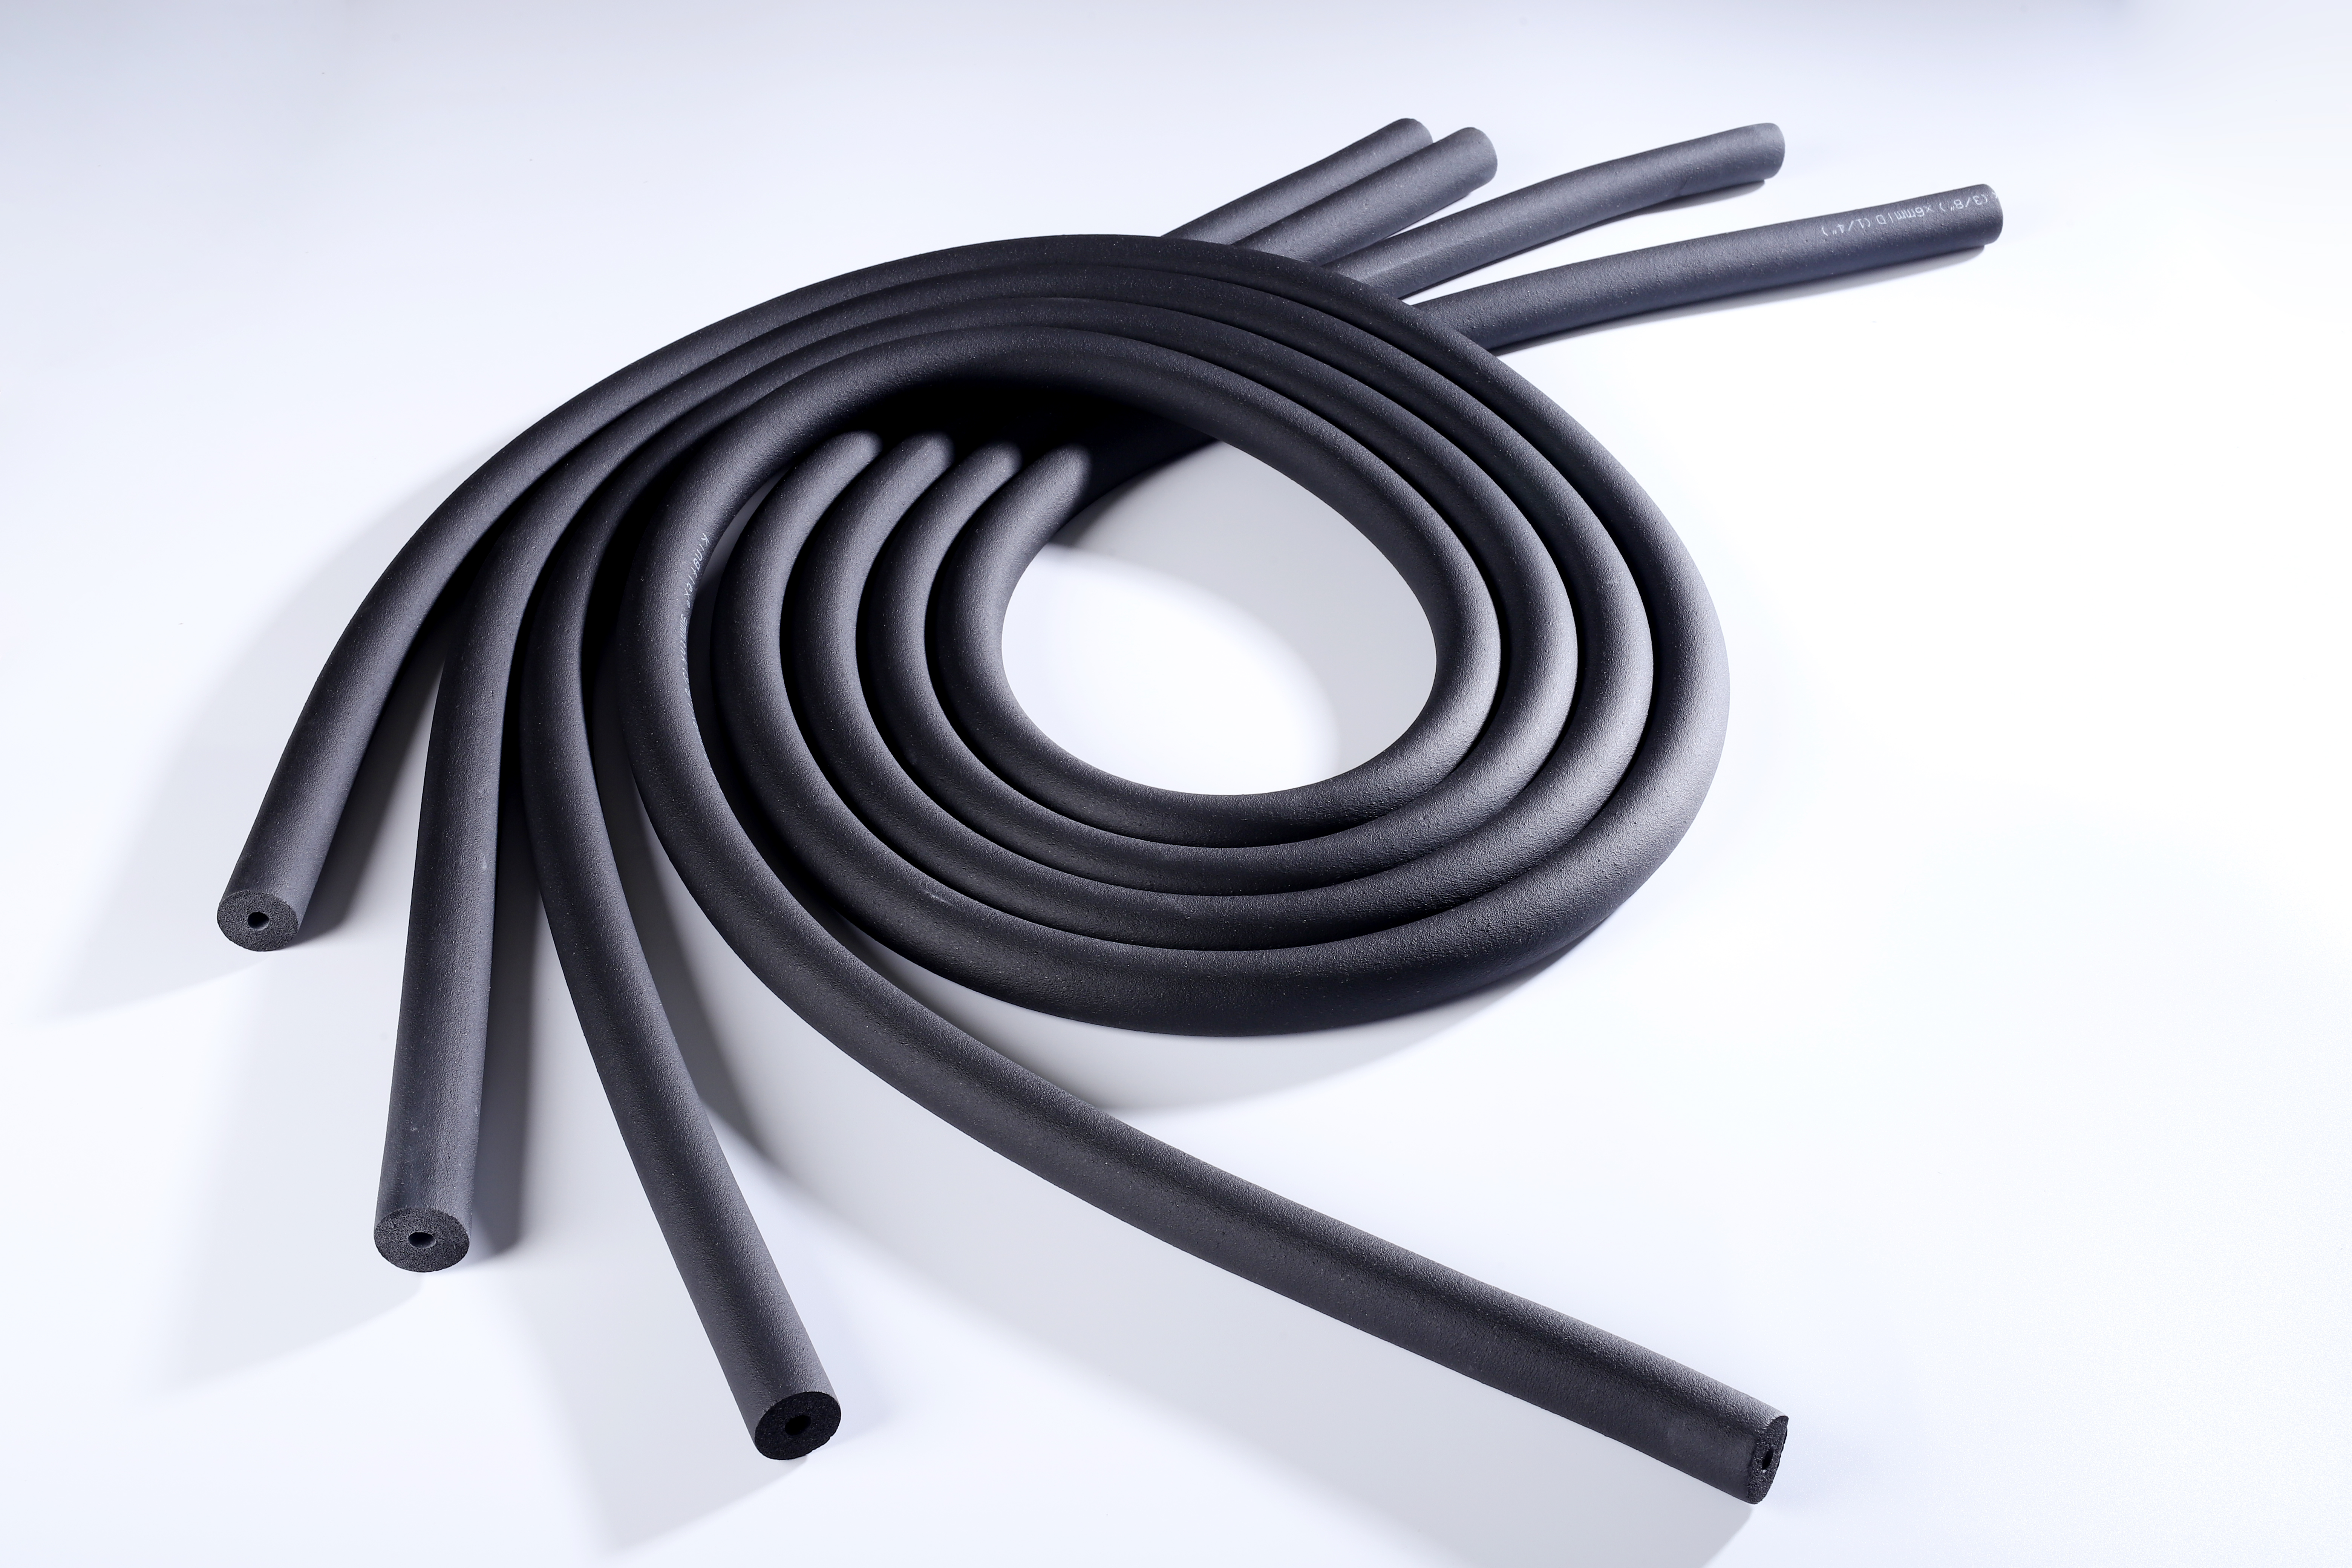 Get High-Quality Kingflex Foam Rubber Tube Pipe Insulation Directly from the Factory - Buy Now!